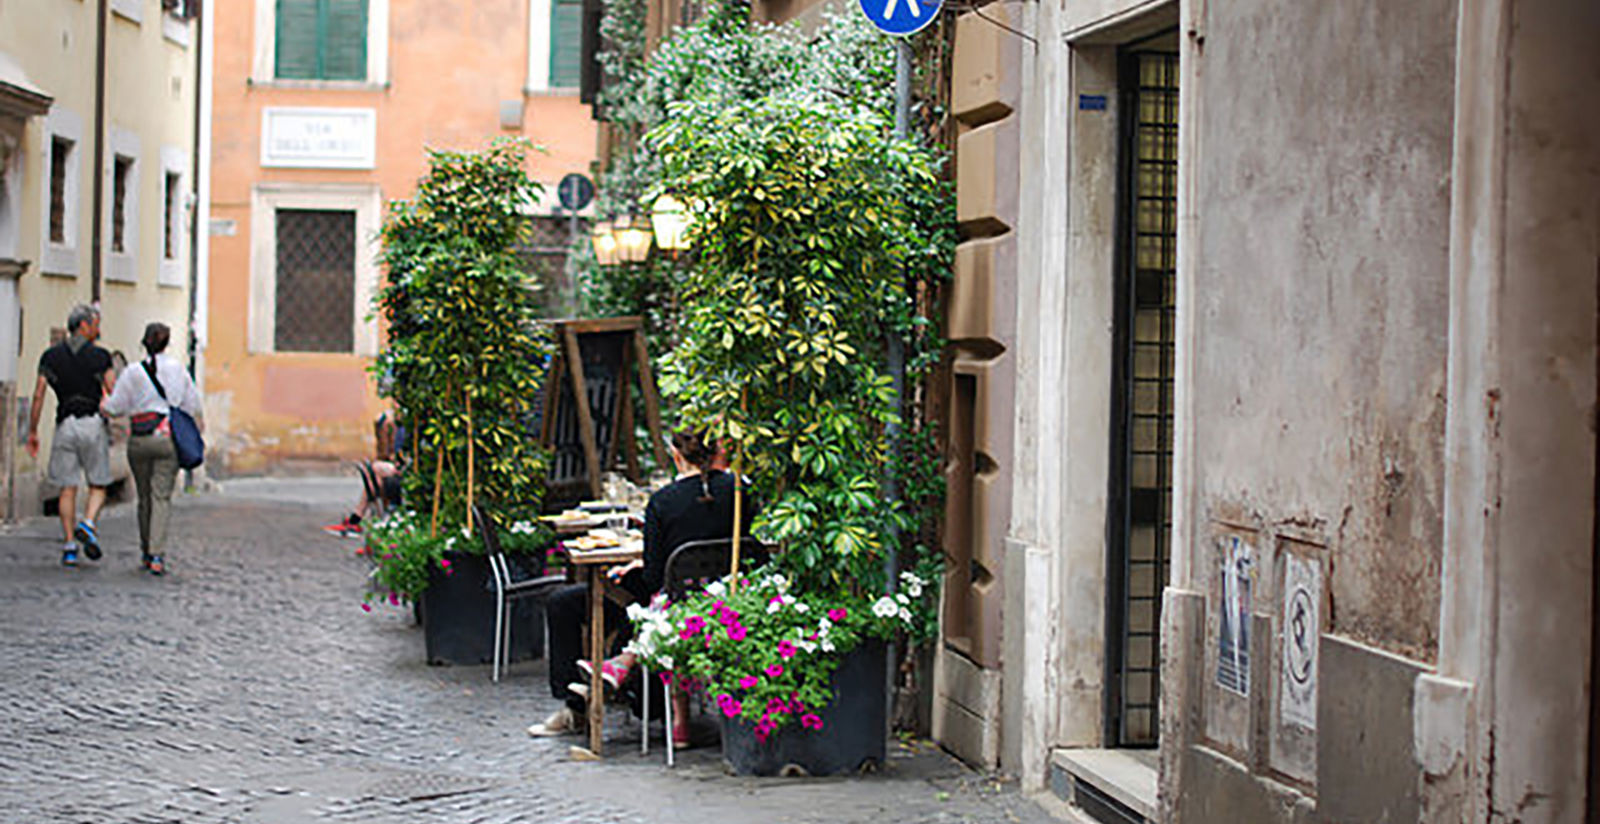 Walking itinerary to discover the Monti neighborhood 1